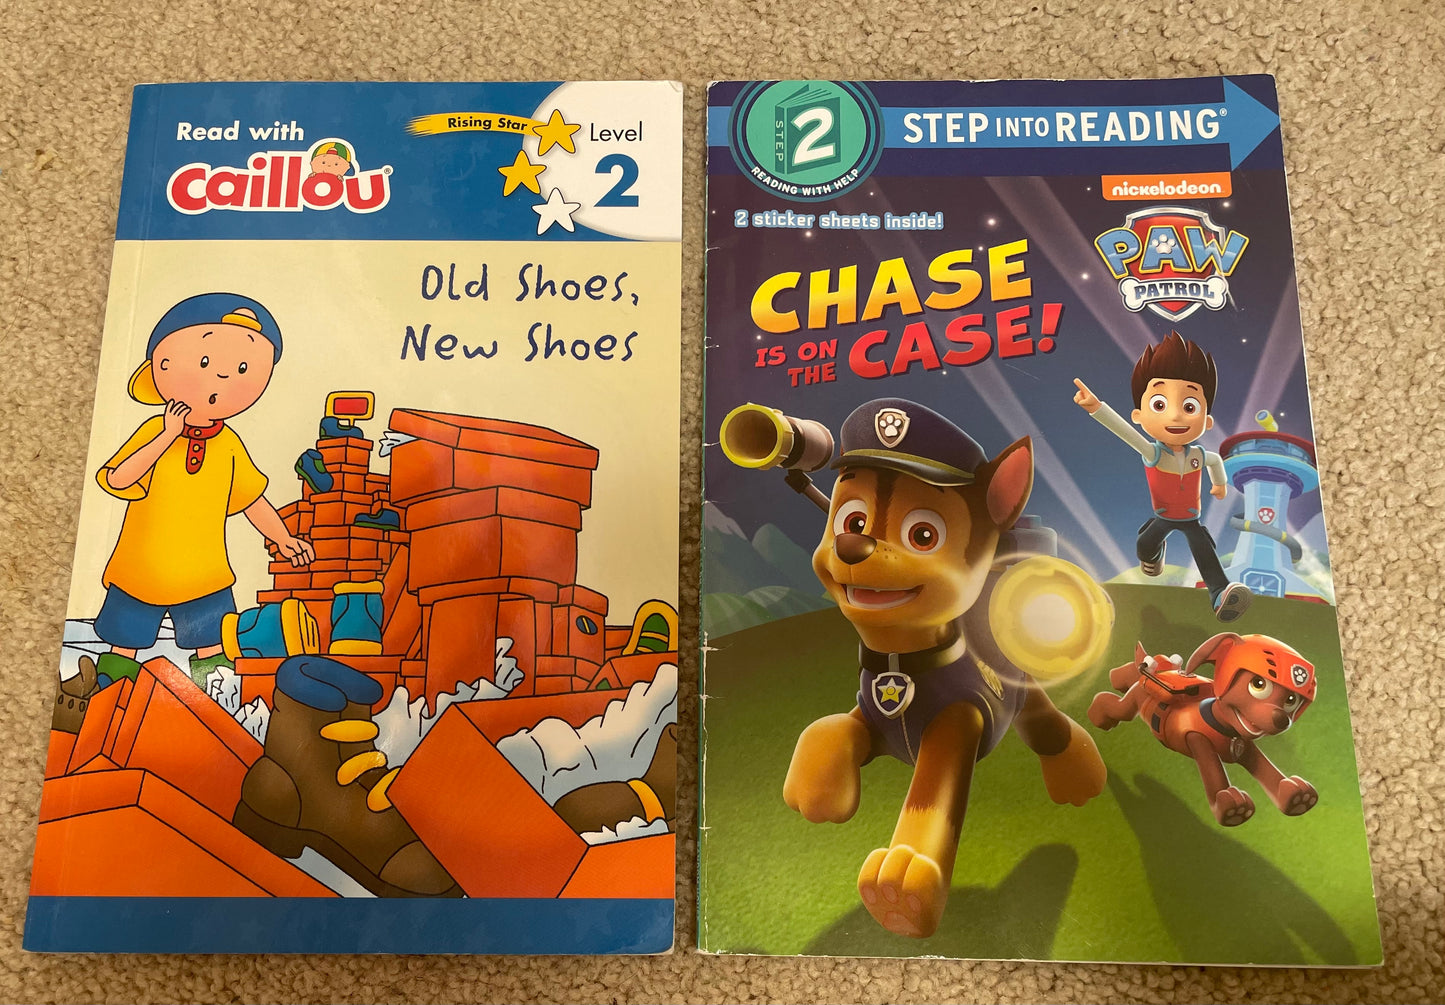 Caillou and Paw Patrol book bundle